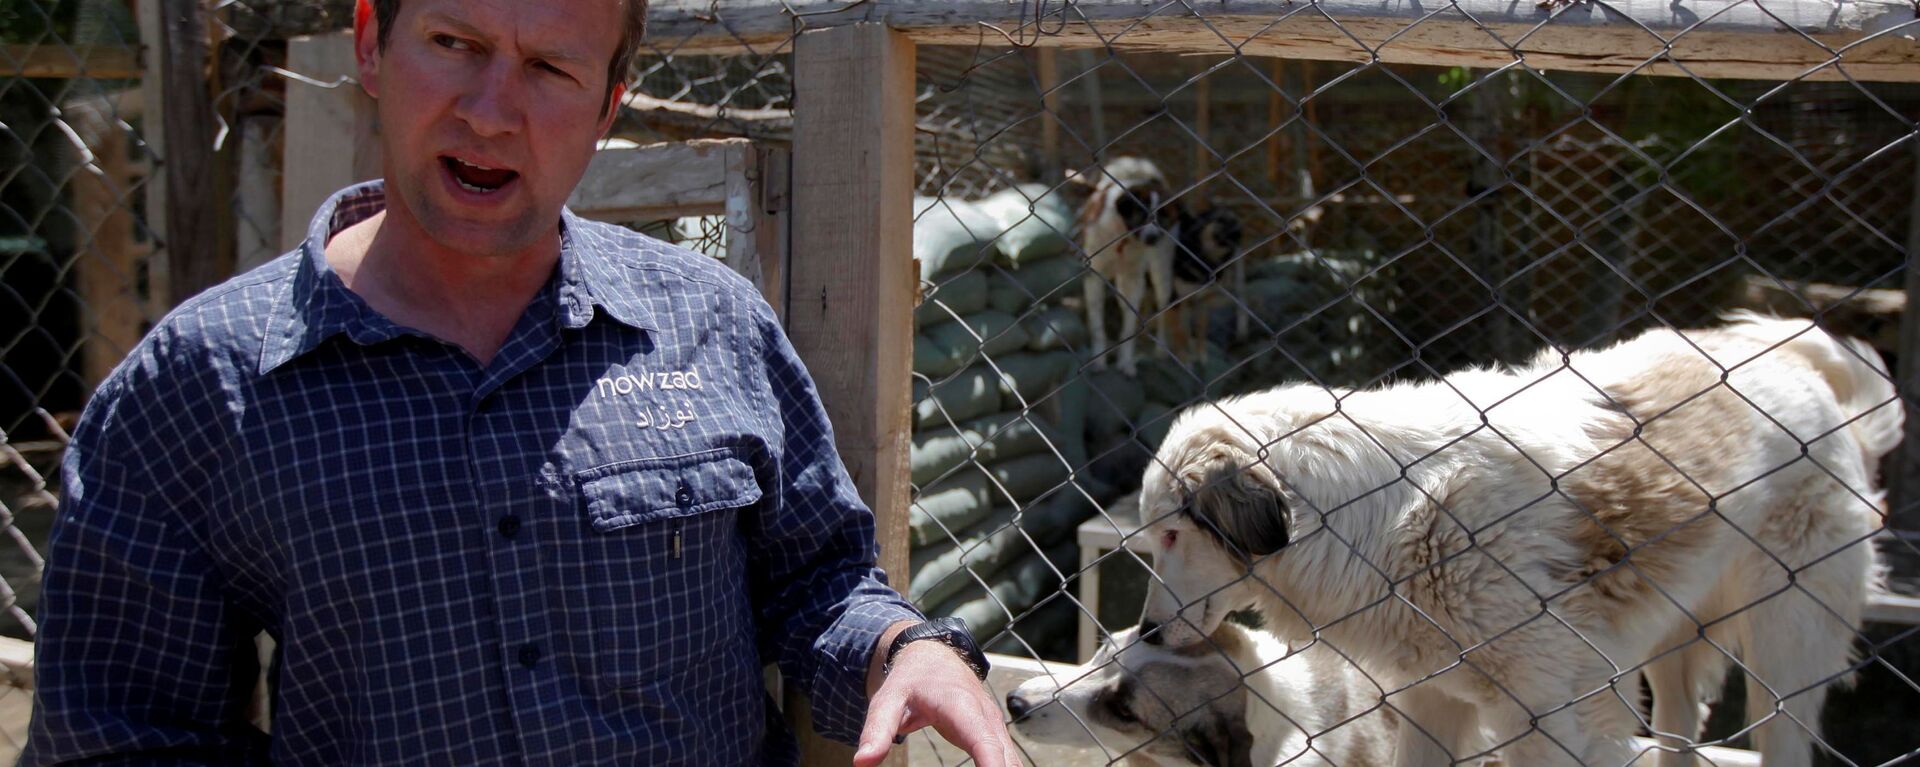 Pen Farthing, founder of British charity Nowzad, an animal shelter, stands in front of a cage on the outskirts of Kabul May 1, 2012. A former Royal Marine, Farthing adopted his dog Nowzad, named after a Helmand district, during his tour there in 2006. He then set up the charity, where dogs and some cats are neutered and vaccinated against rabies before their journeys abroad. Nowzad has given homes to over 330 dogs since it was founded, mostly to soldiers from the U.S. and Britain, but also from South Africa, Australia, Canada and the Netherlands. Picture taken May 1, 2012. - Sputnik International, 1920, 26.01.2022